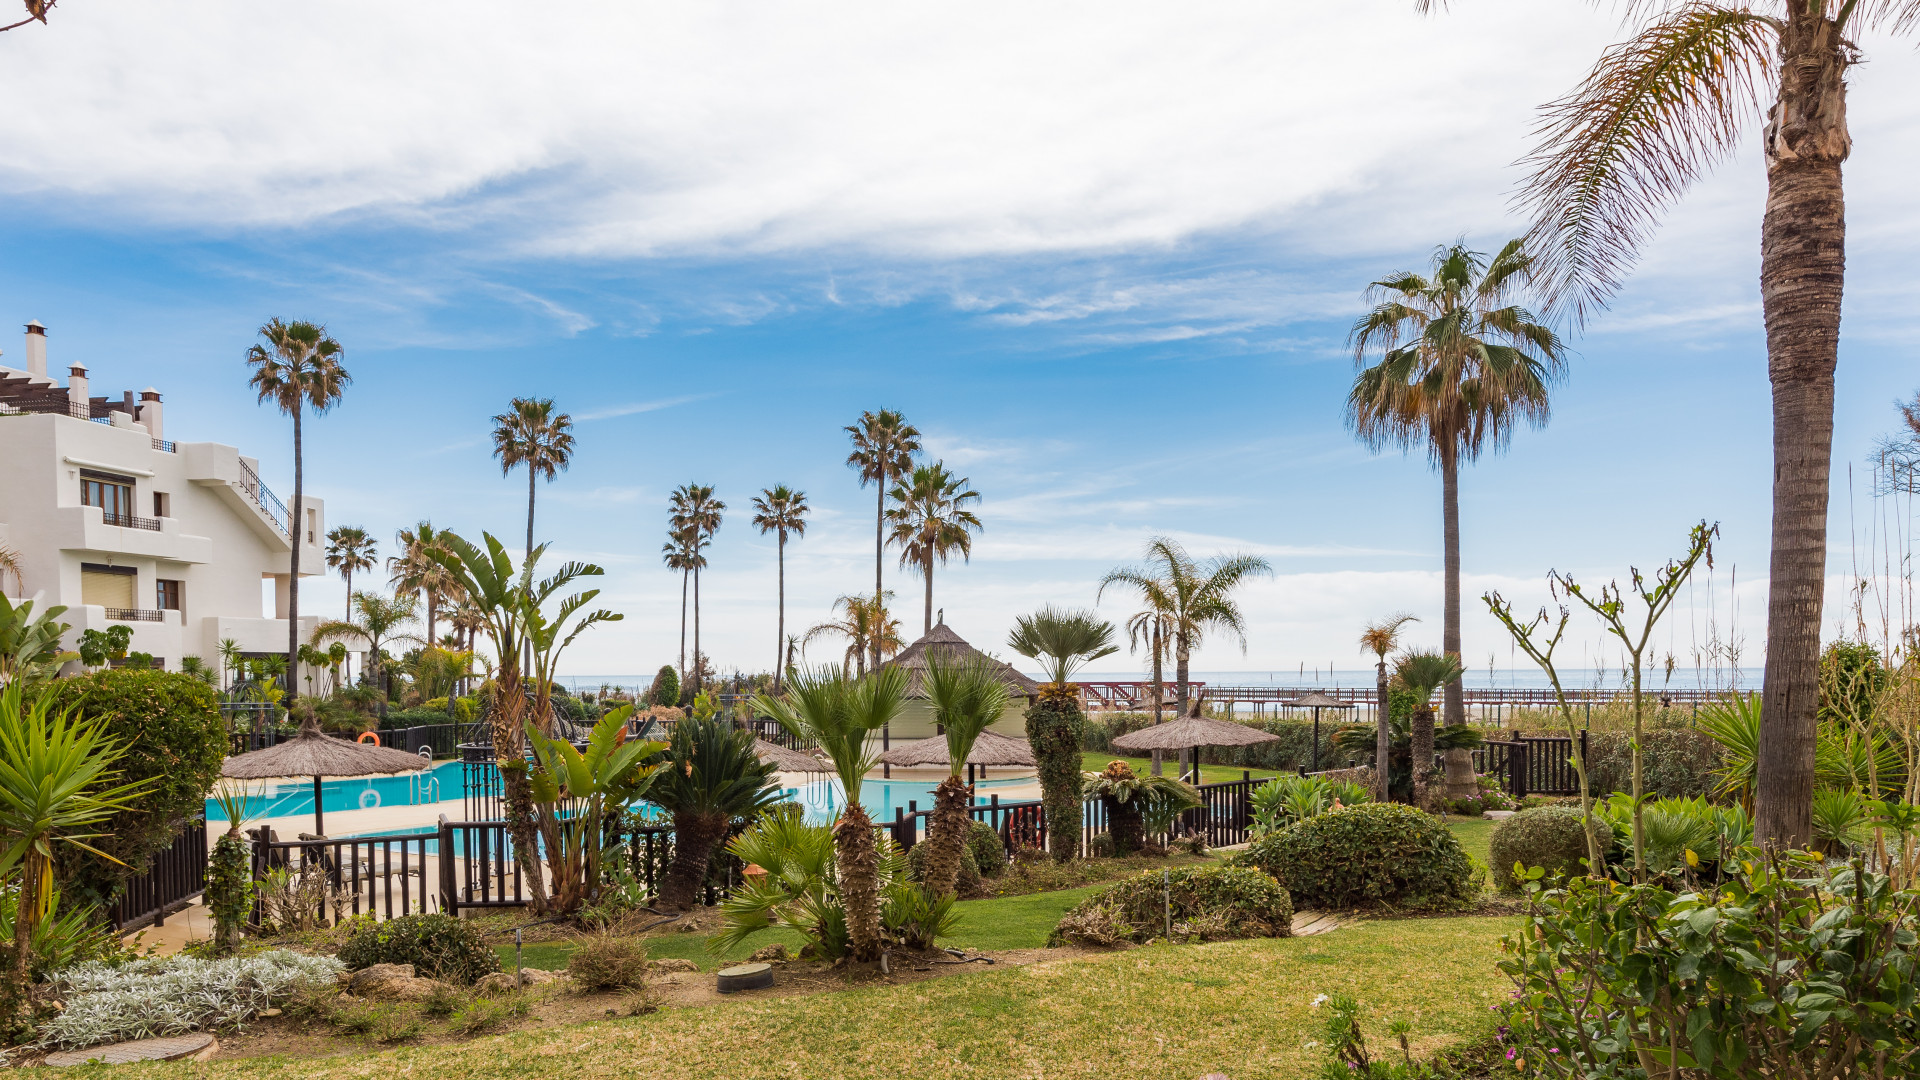 Fully refurbished ground floor apartment in a luxurious first line beach community located at one of the finest beaches in Estepona